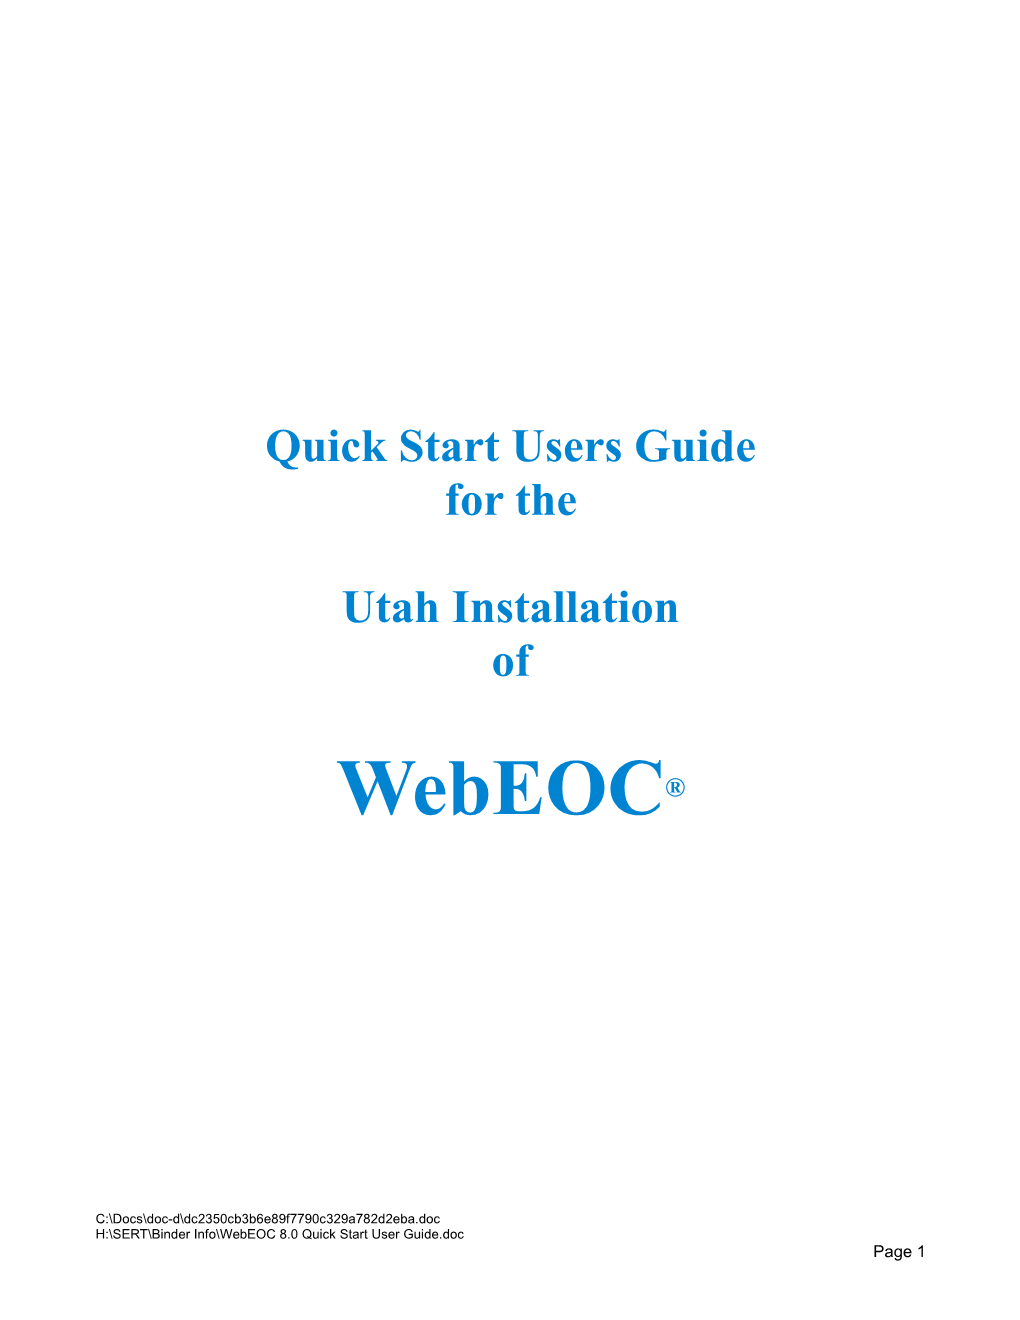 Quick Start Users Guide